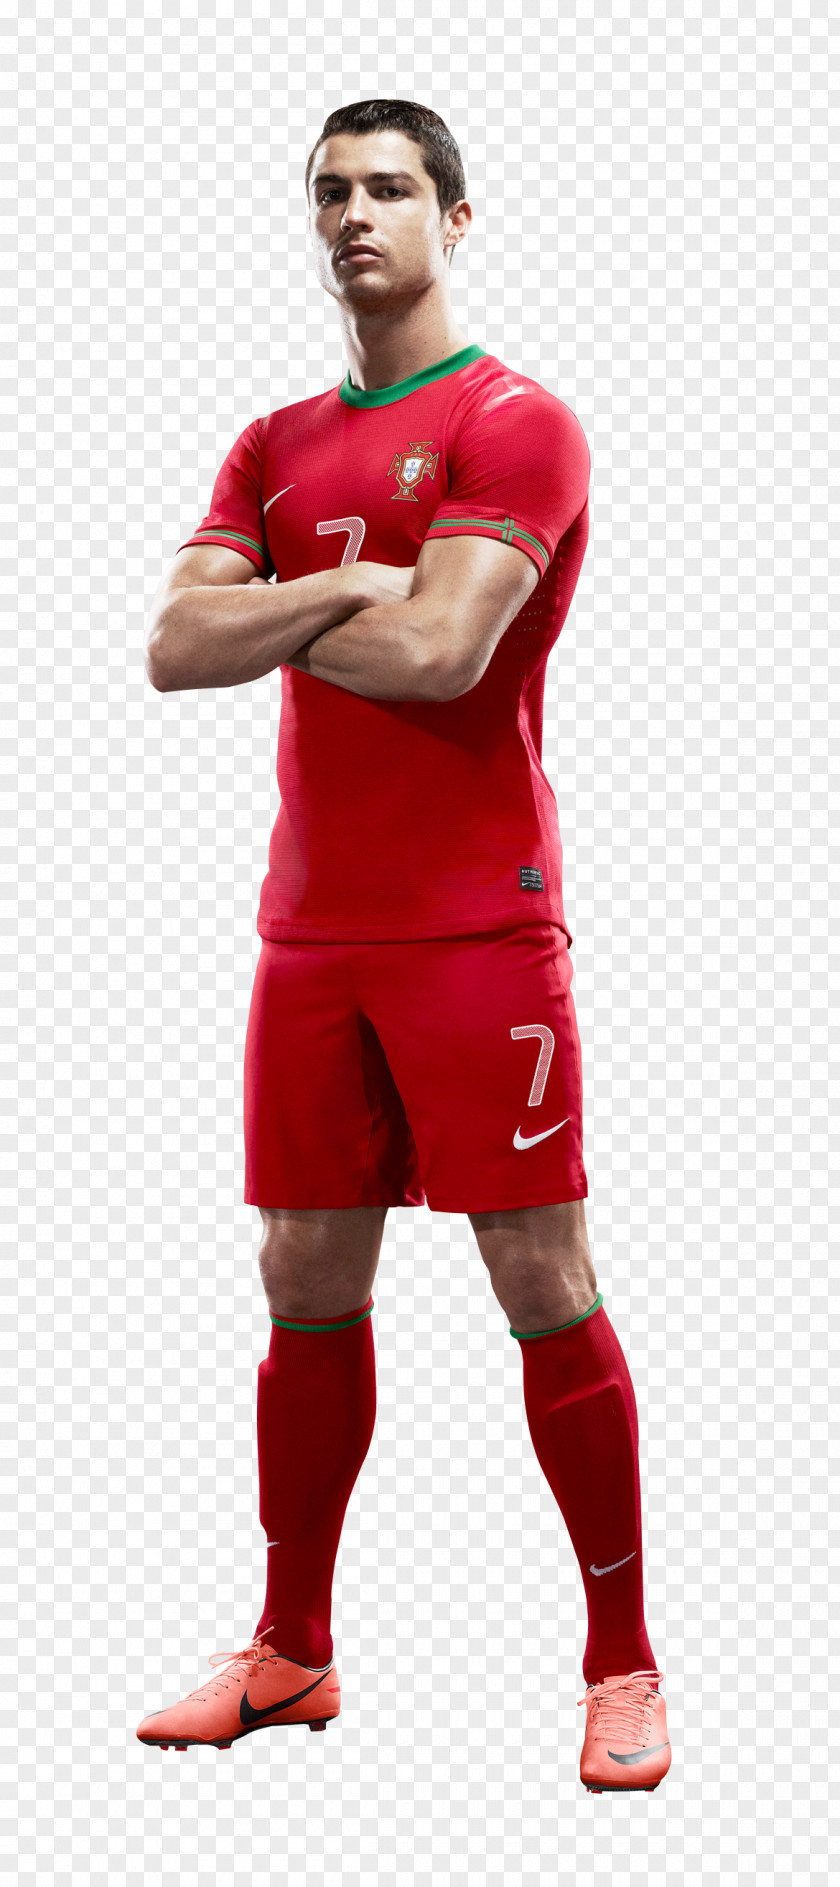 Cristiano Ronaldo Portugal National Football Team Real Madrid C.F. Jersey PNG